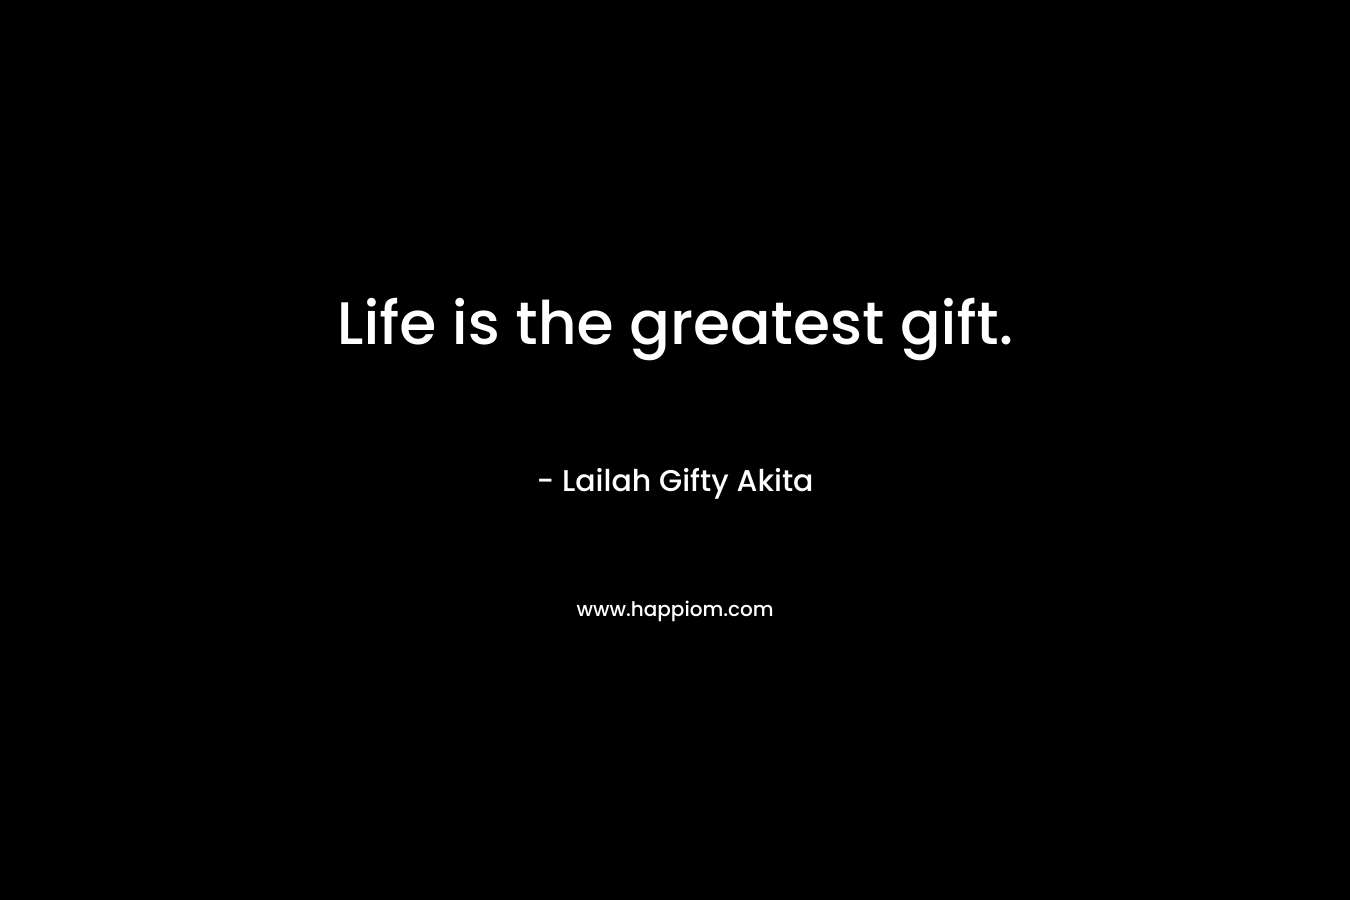 Life is the greatest gift.